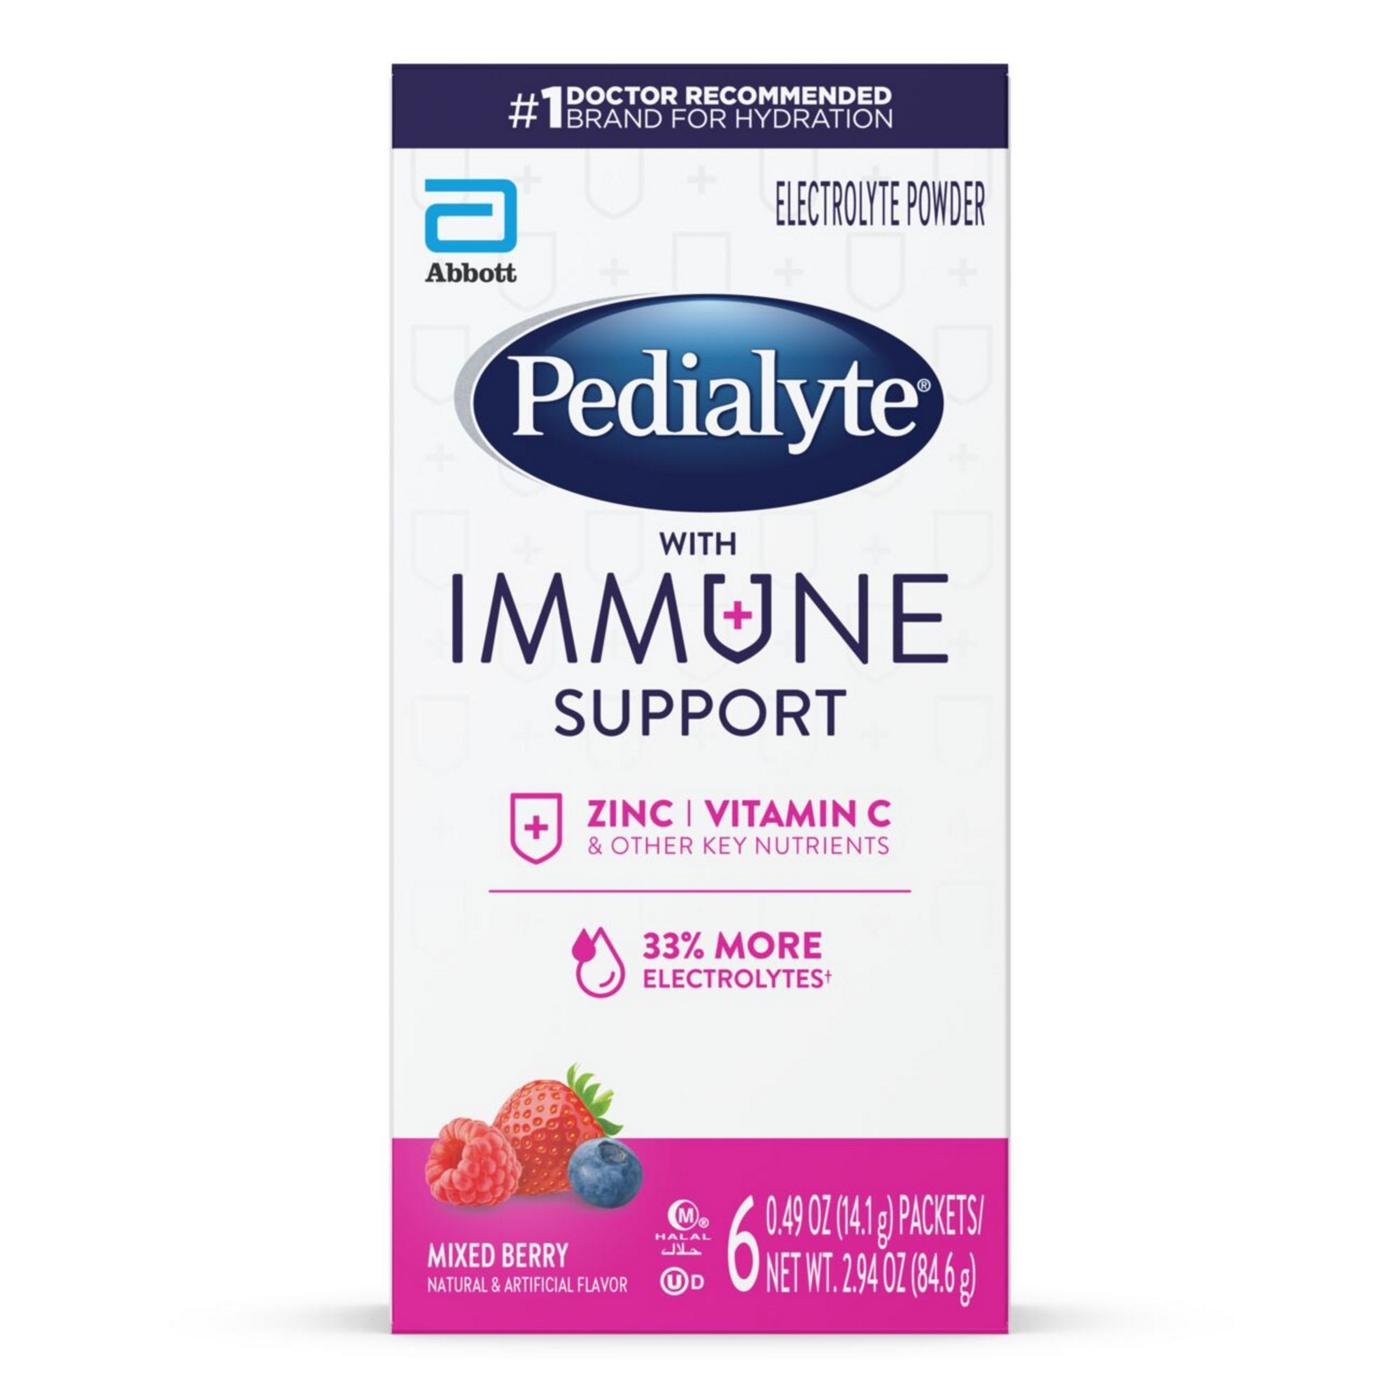 Pedialyte with Immune Support Electrolyte Powder Packs - Mixed Berry; image 1 of 7